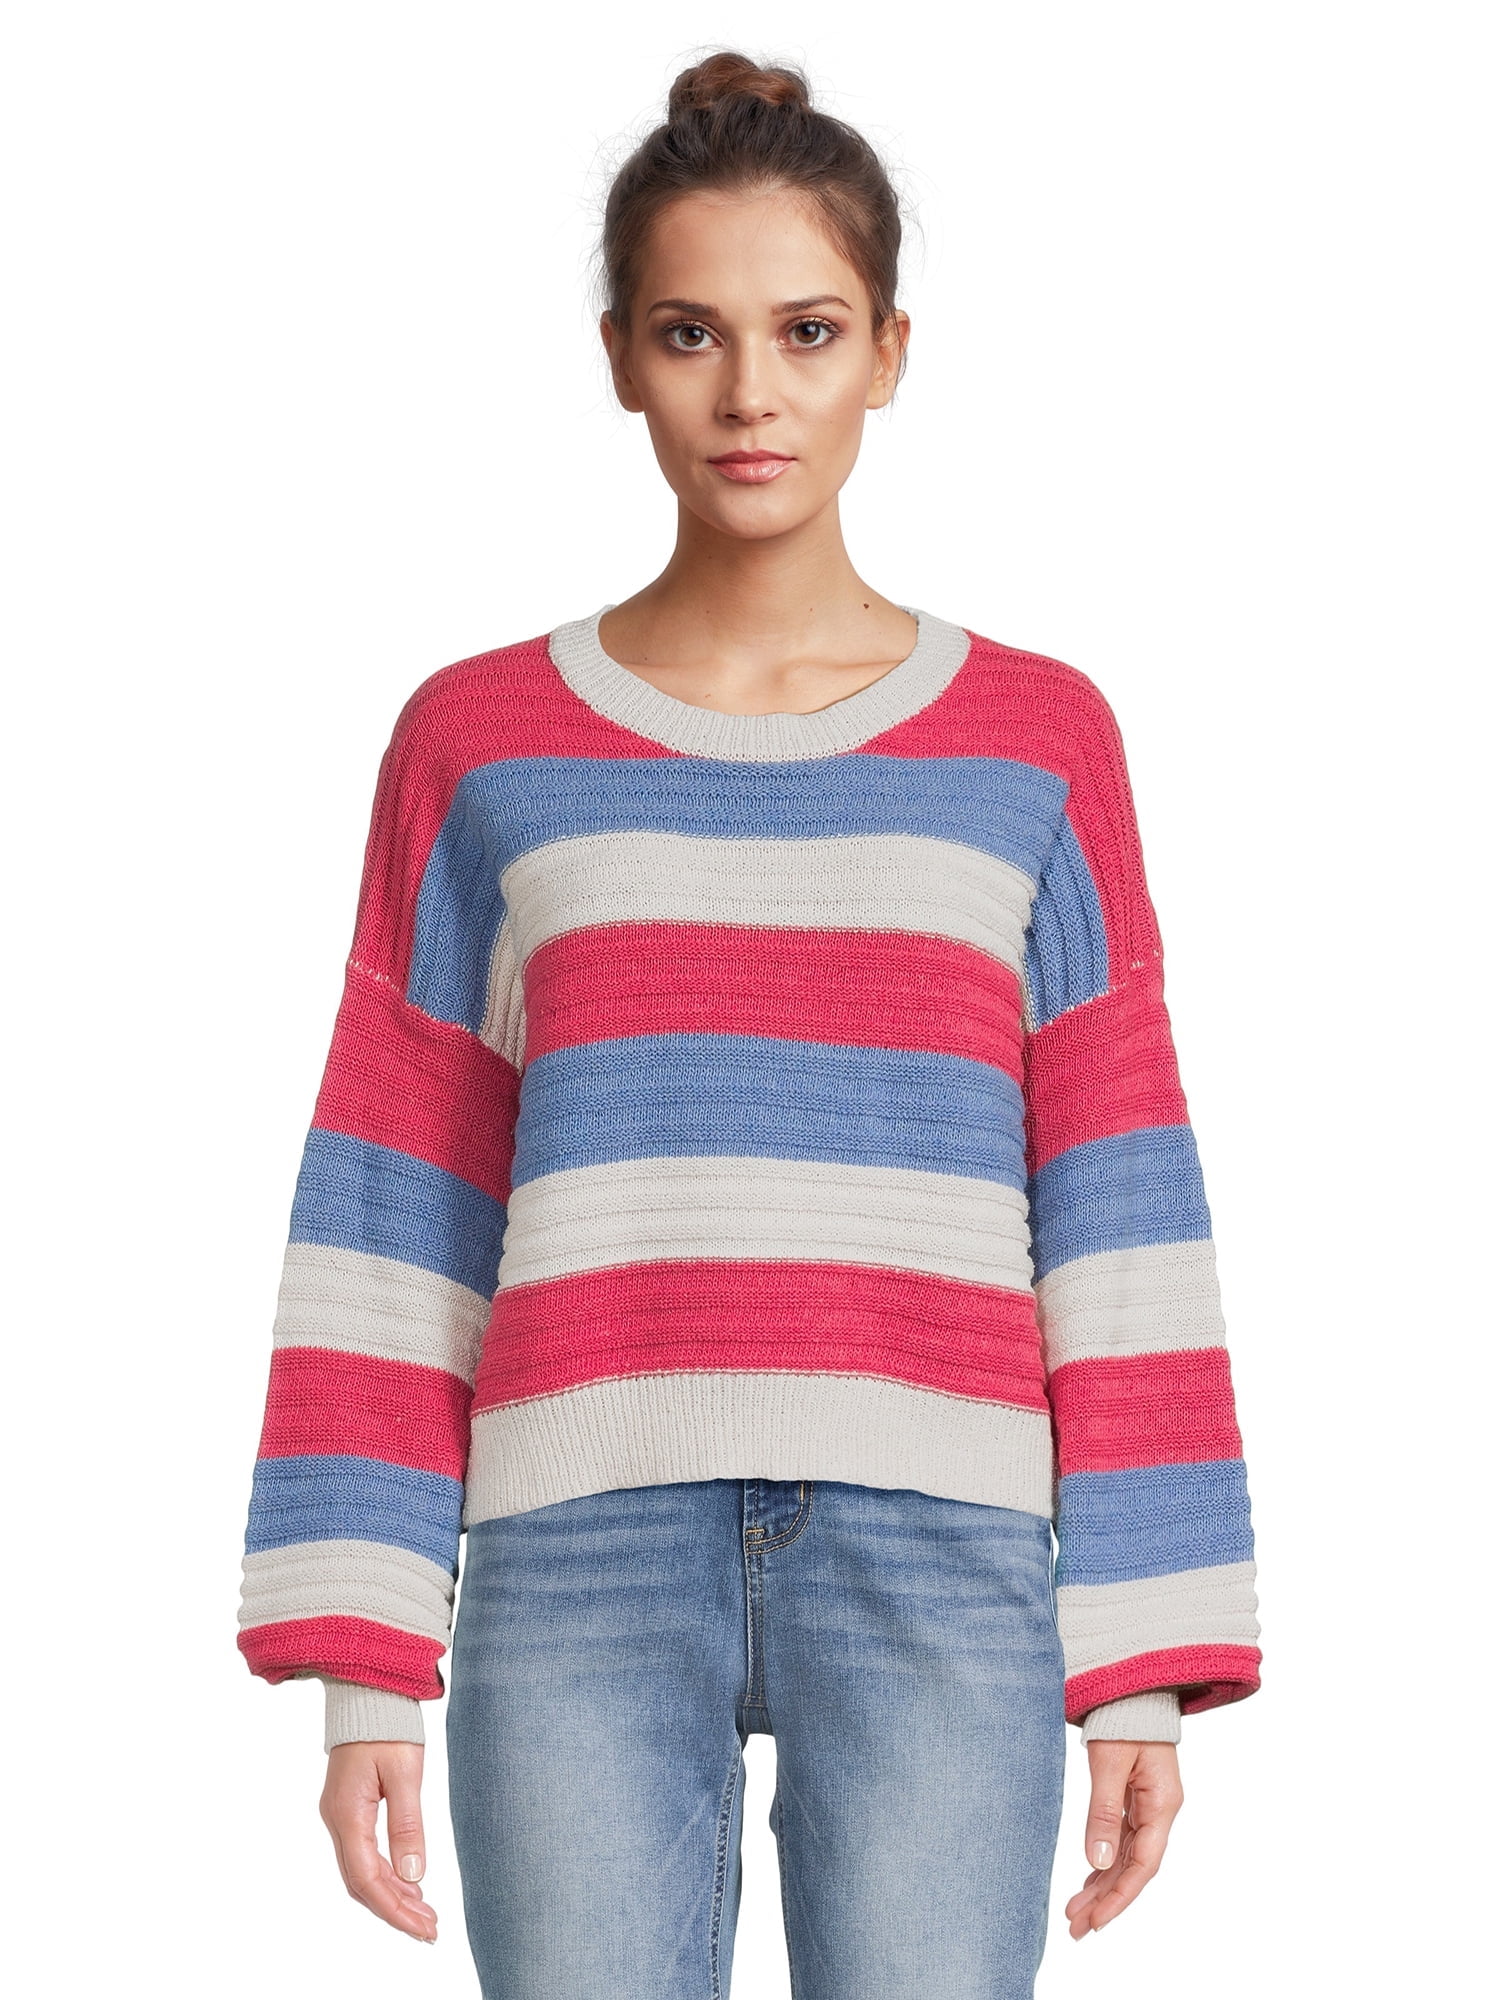 Dreamers by Debut Womens Rainbow Pullover Long Sleeve Sweater - Walmart.com